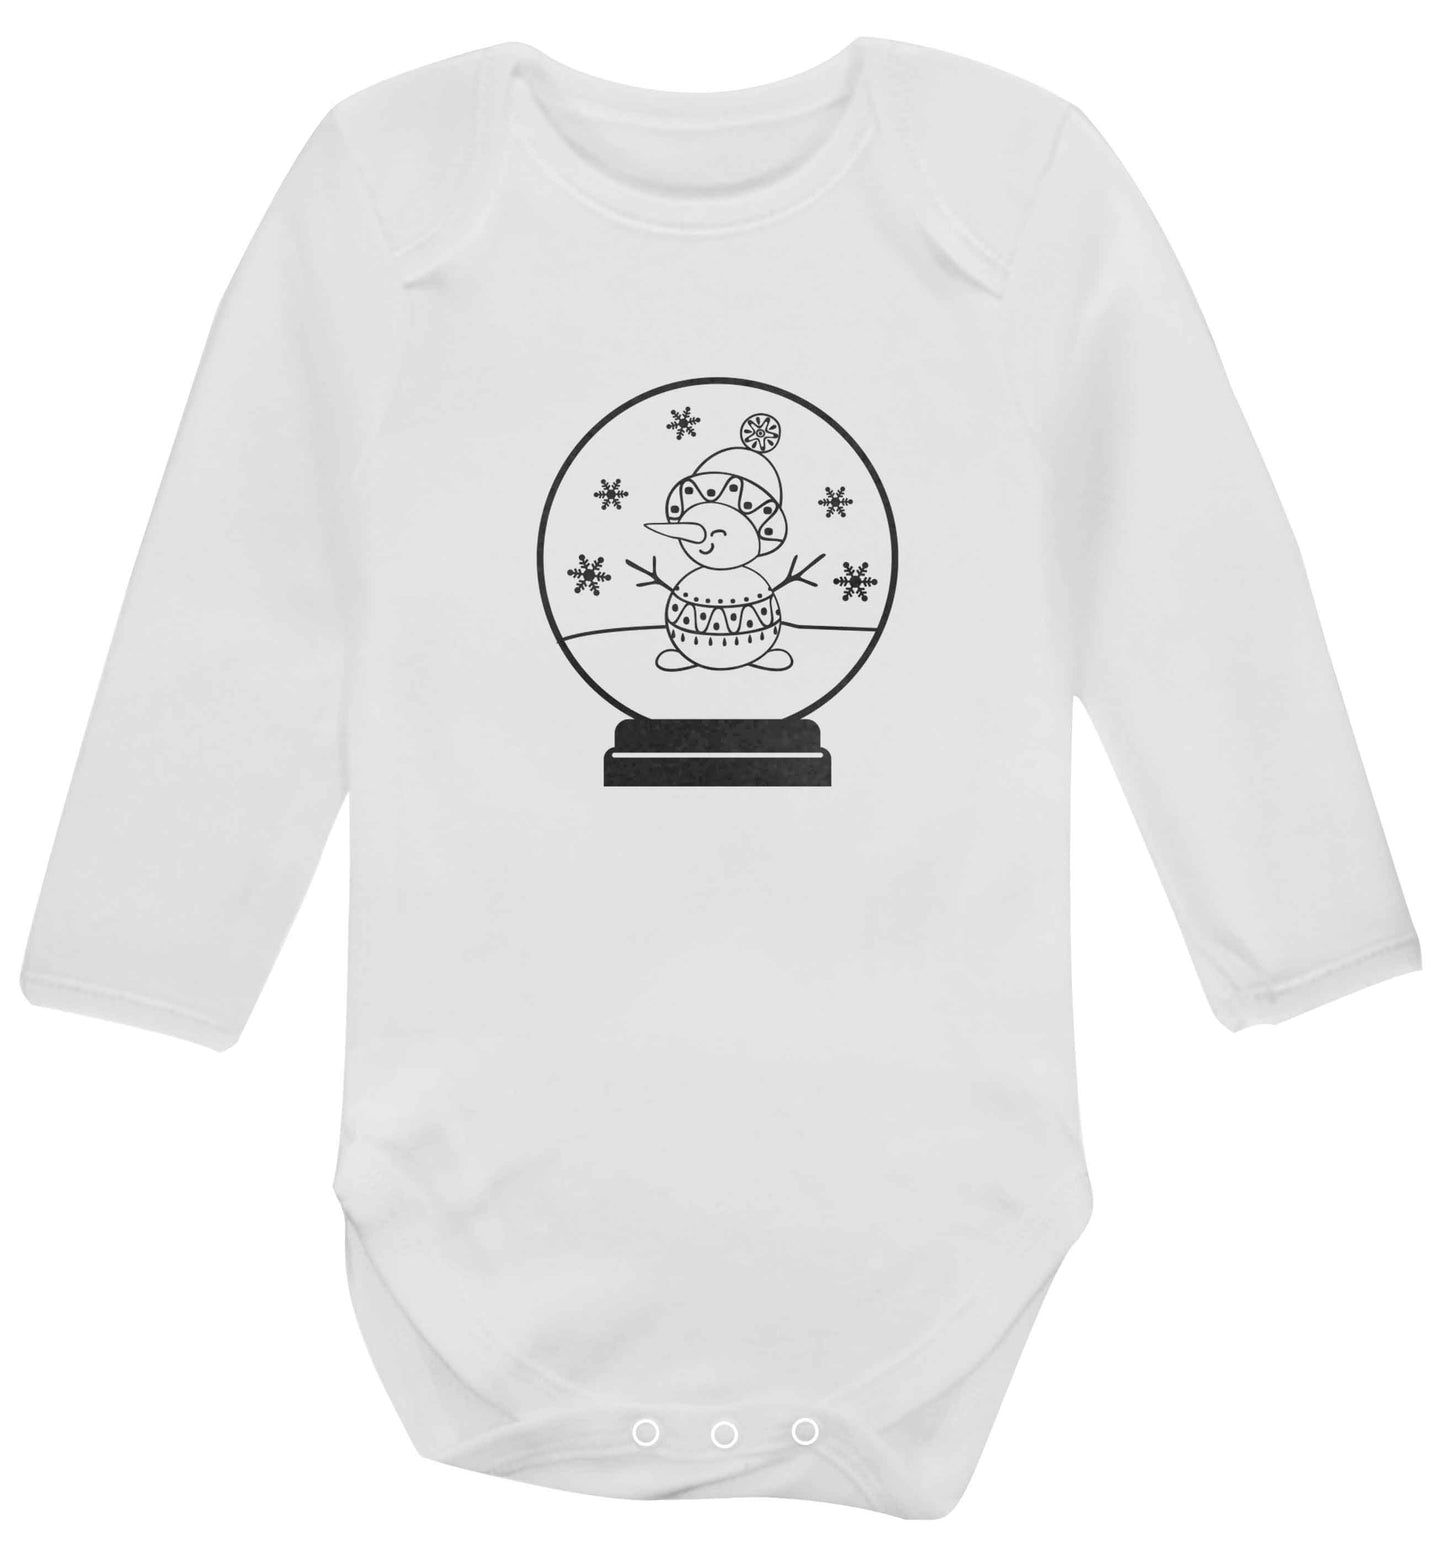 Snowman Snowglobe baby vest long sleeved white 6-12 months